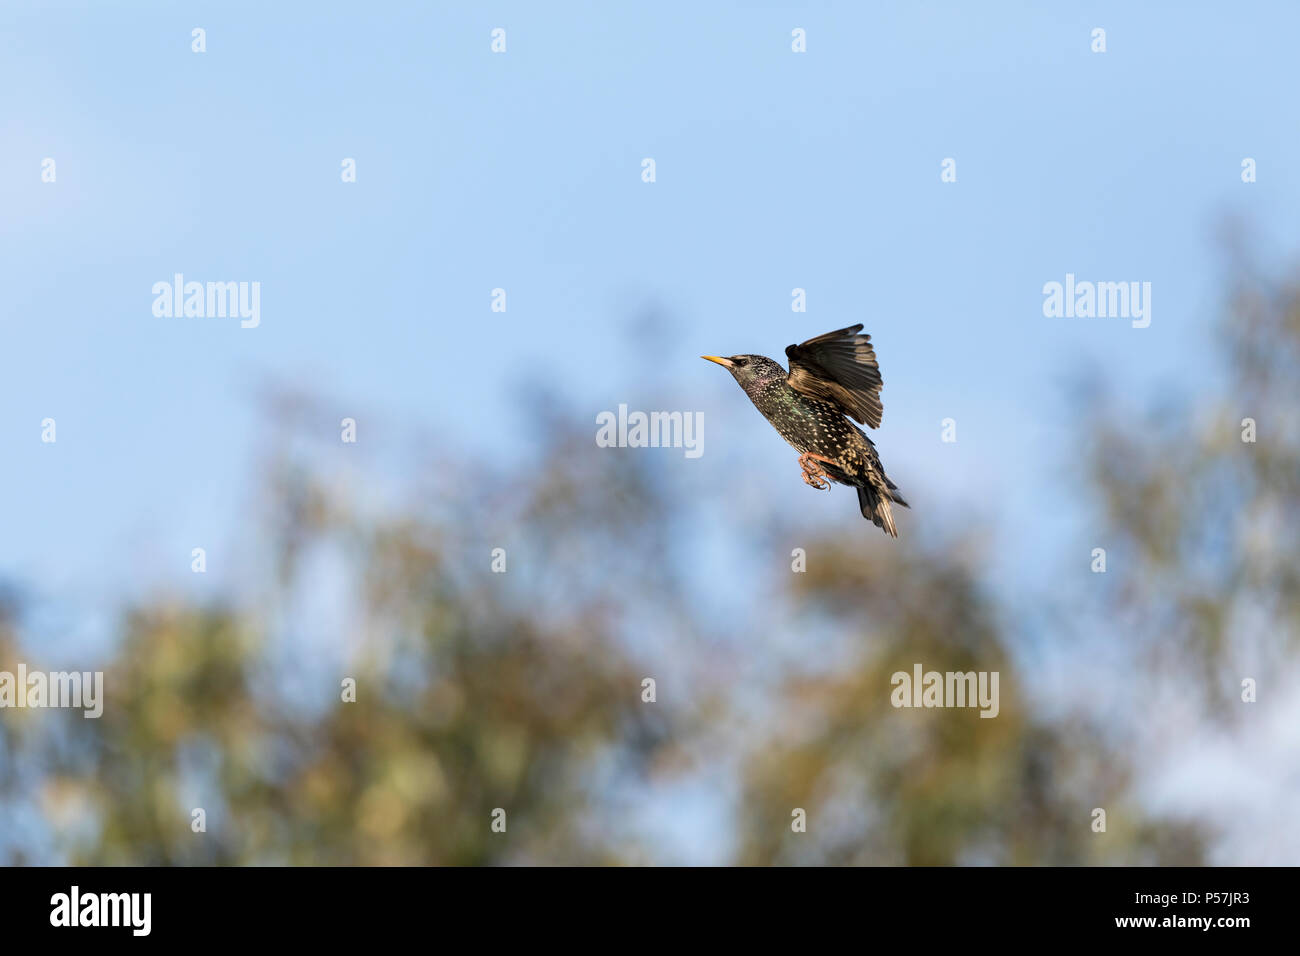 Single Common Starling Sturnus vulgaris flying against distant trees and blue sky in garden Stock Photo